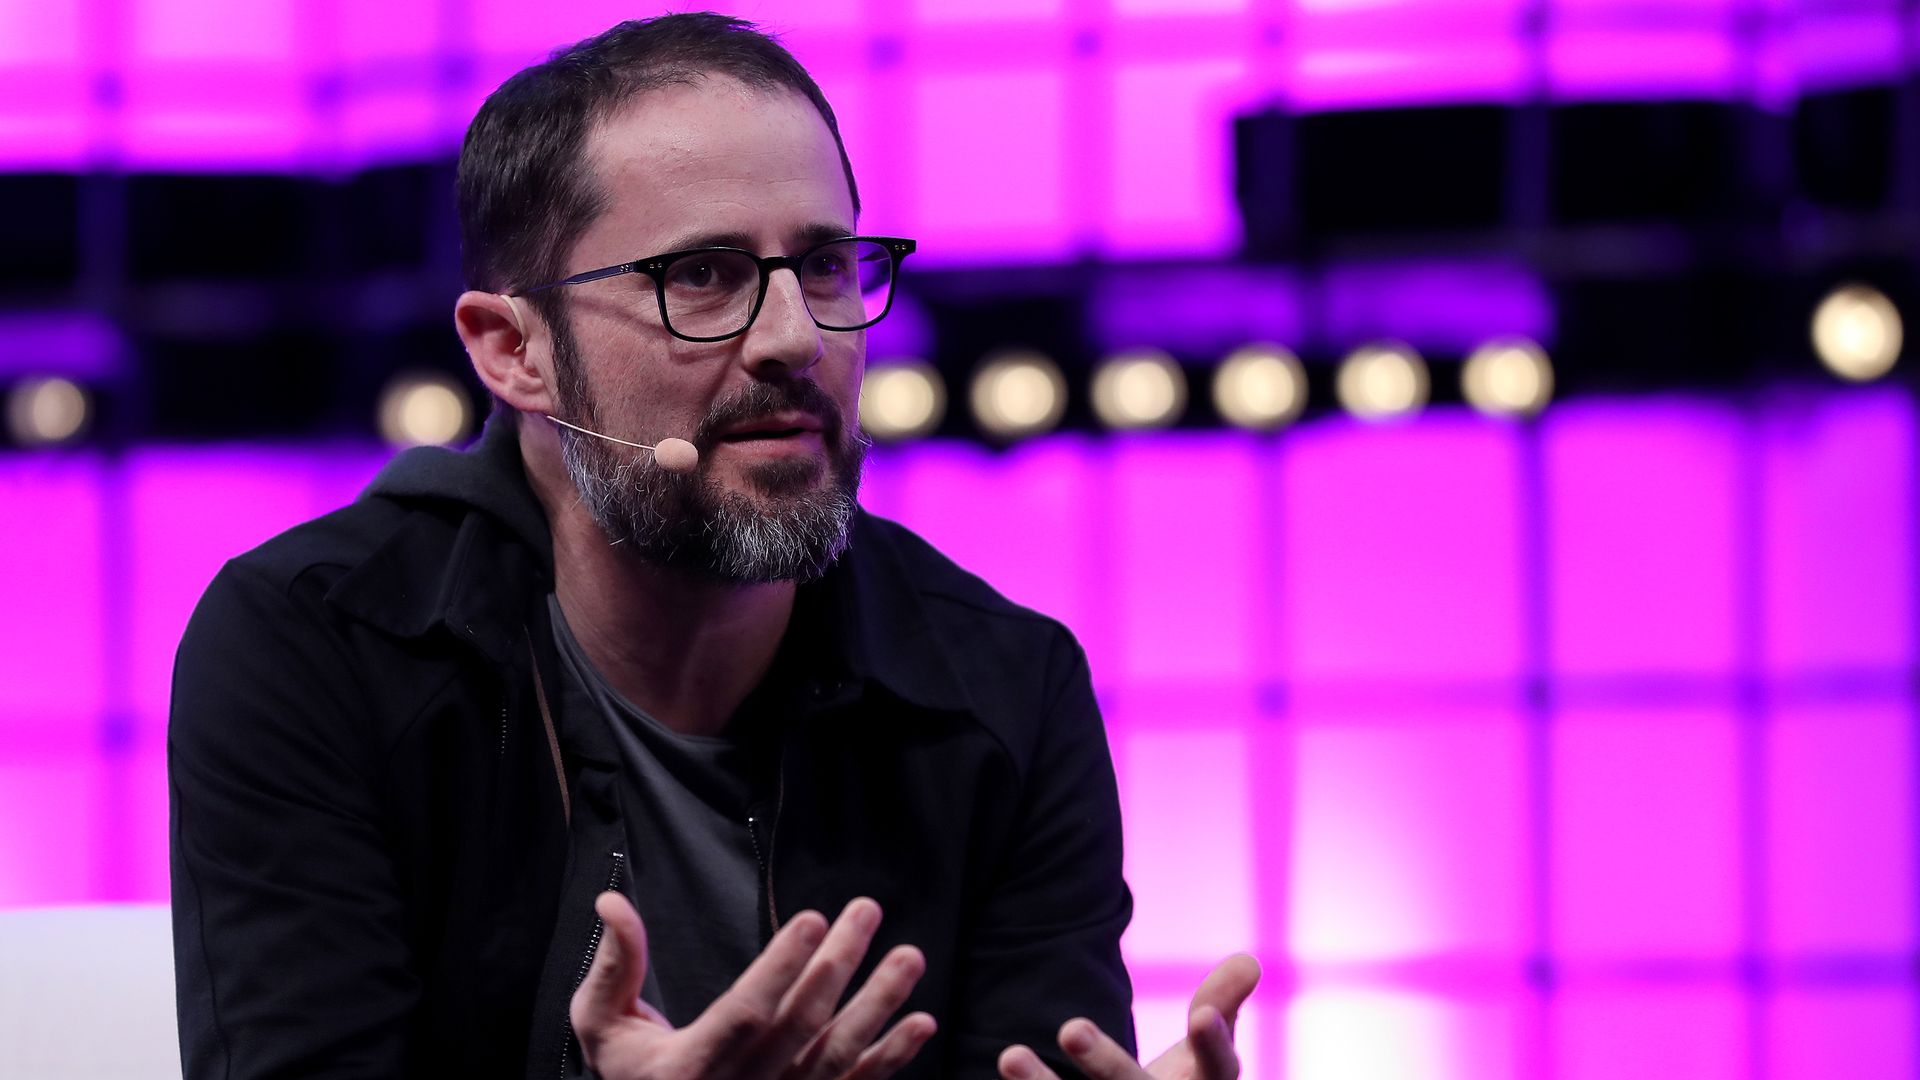 Medium Founder & CEO Ev Williams speaks during the Web Summit 2018 in Lisbon, Portugal on November 8, 2018. ( Photo by Pedro Fiúza/NurPhoto via Getty Images)